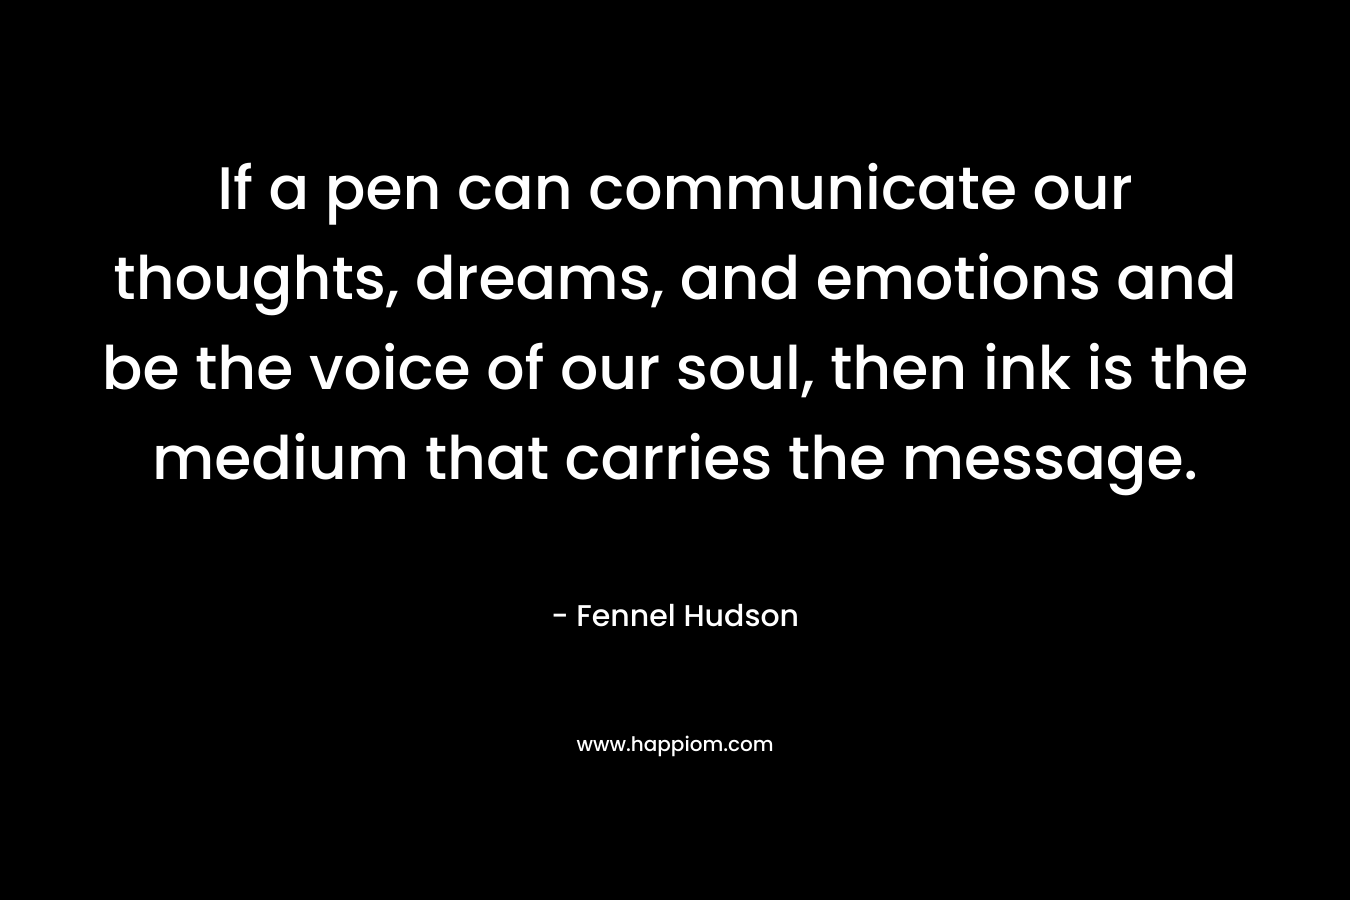 If a pen can communicate our thoughts, dreams, and emotions and be the voice of our soul, then ink is the medium that carries the message. – Fennel Hudson